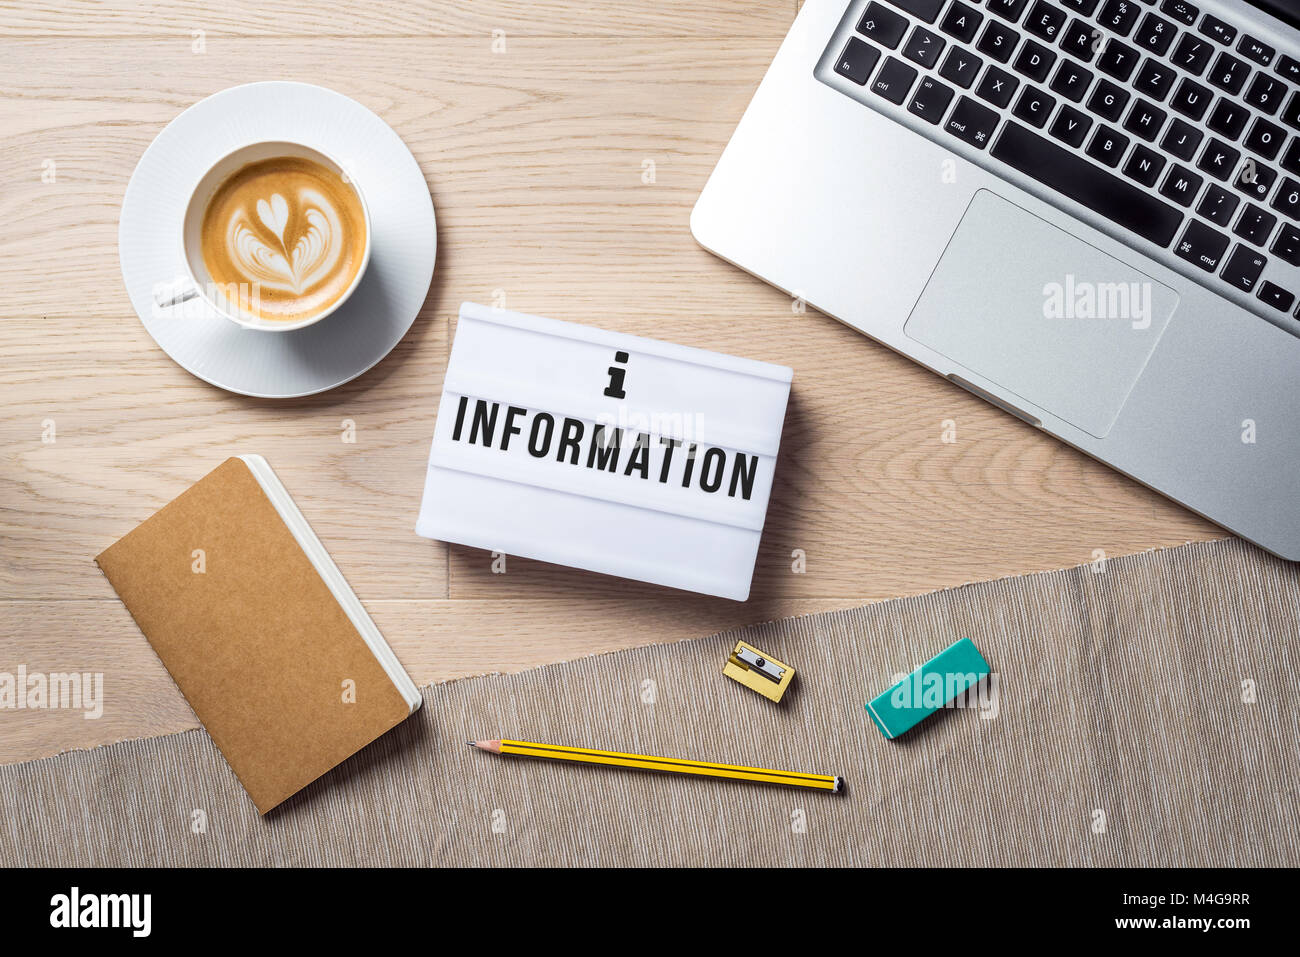 Information Writing In Lightbox Lying On Wooden Desk With Office